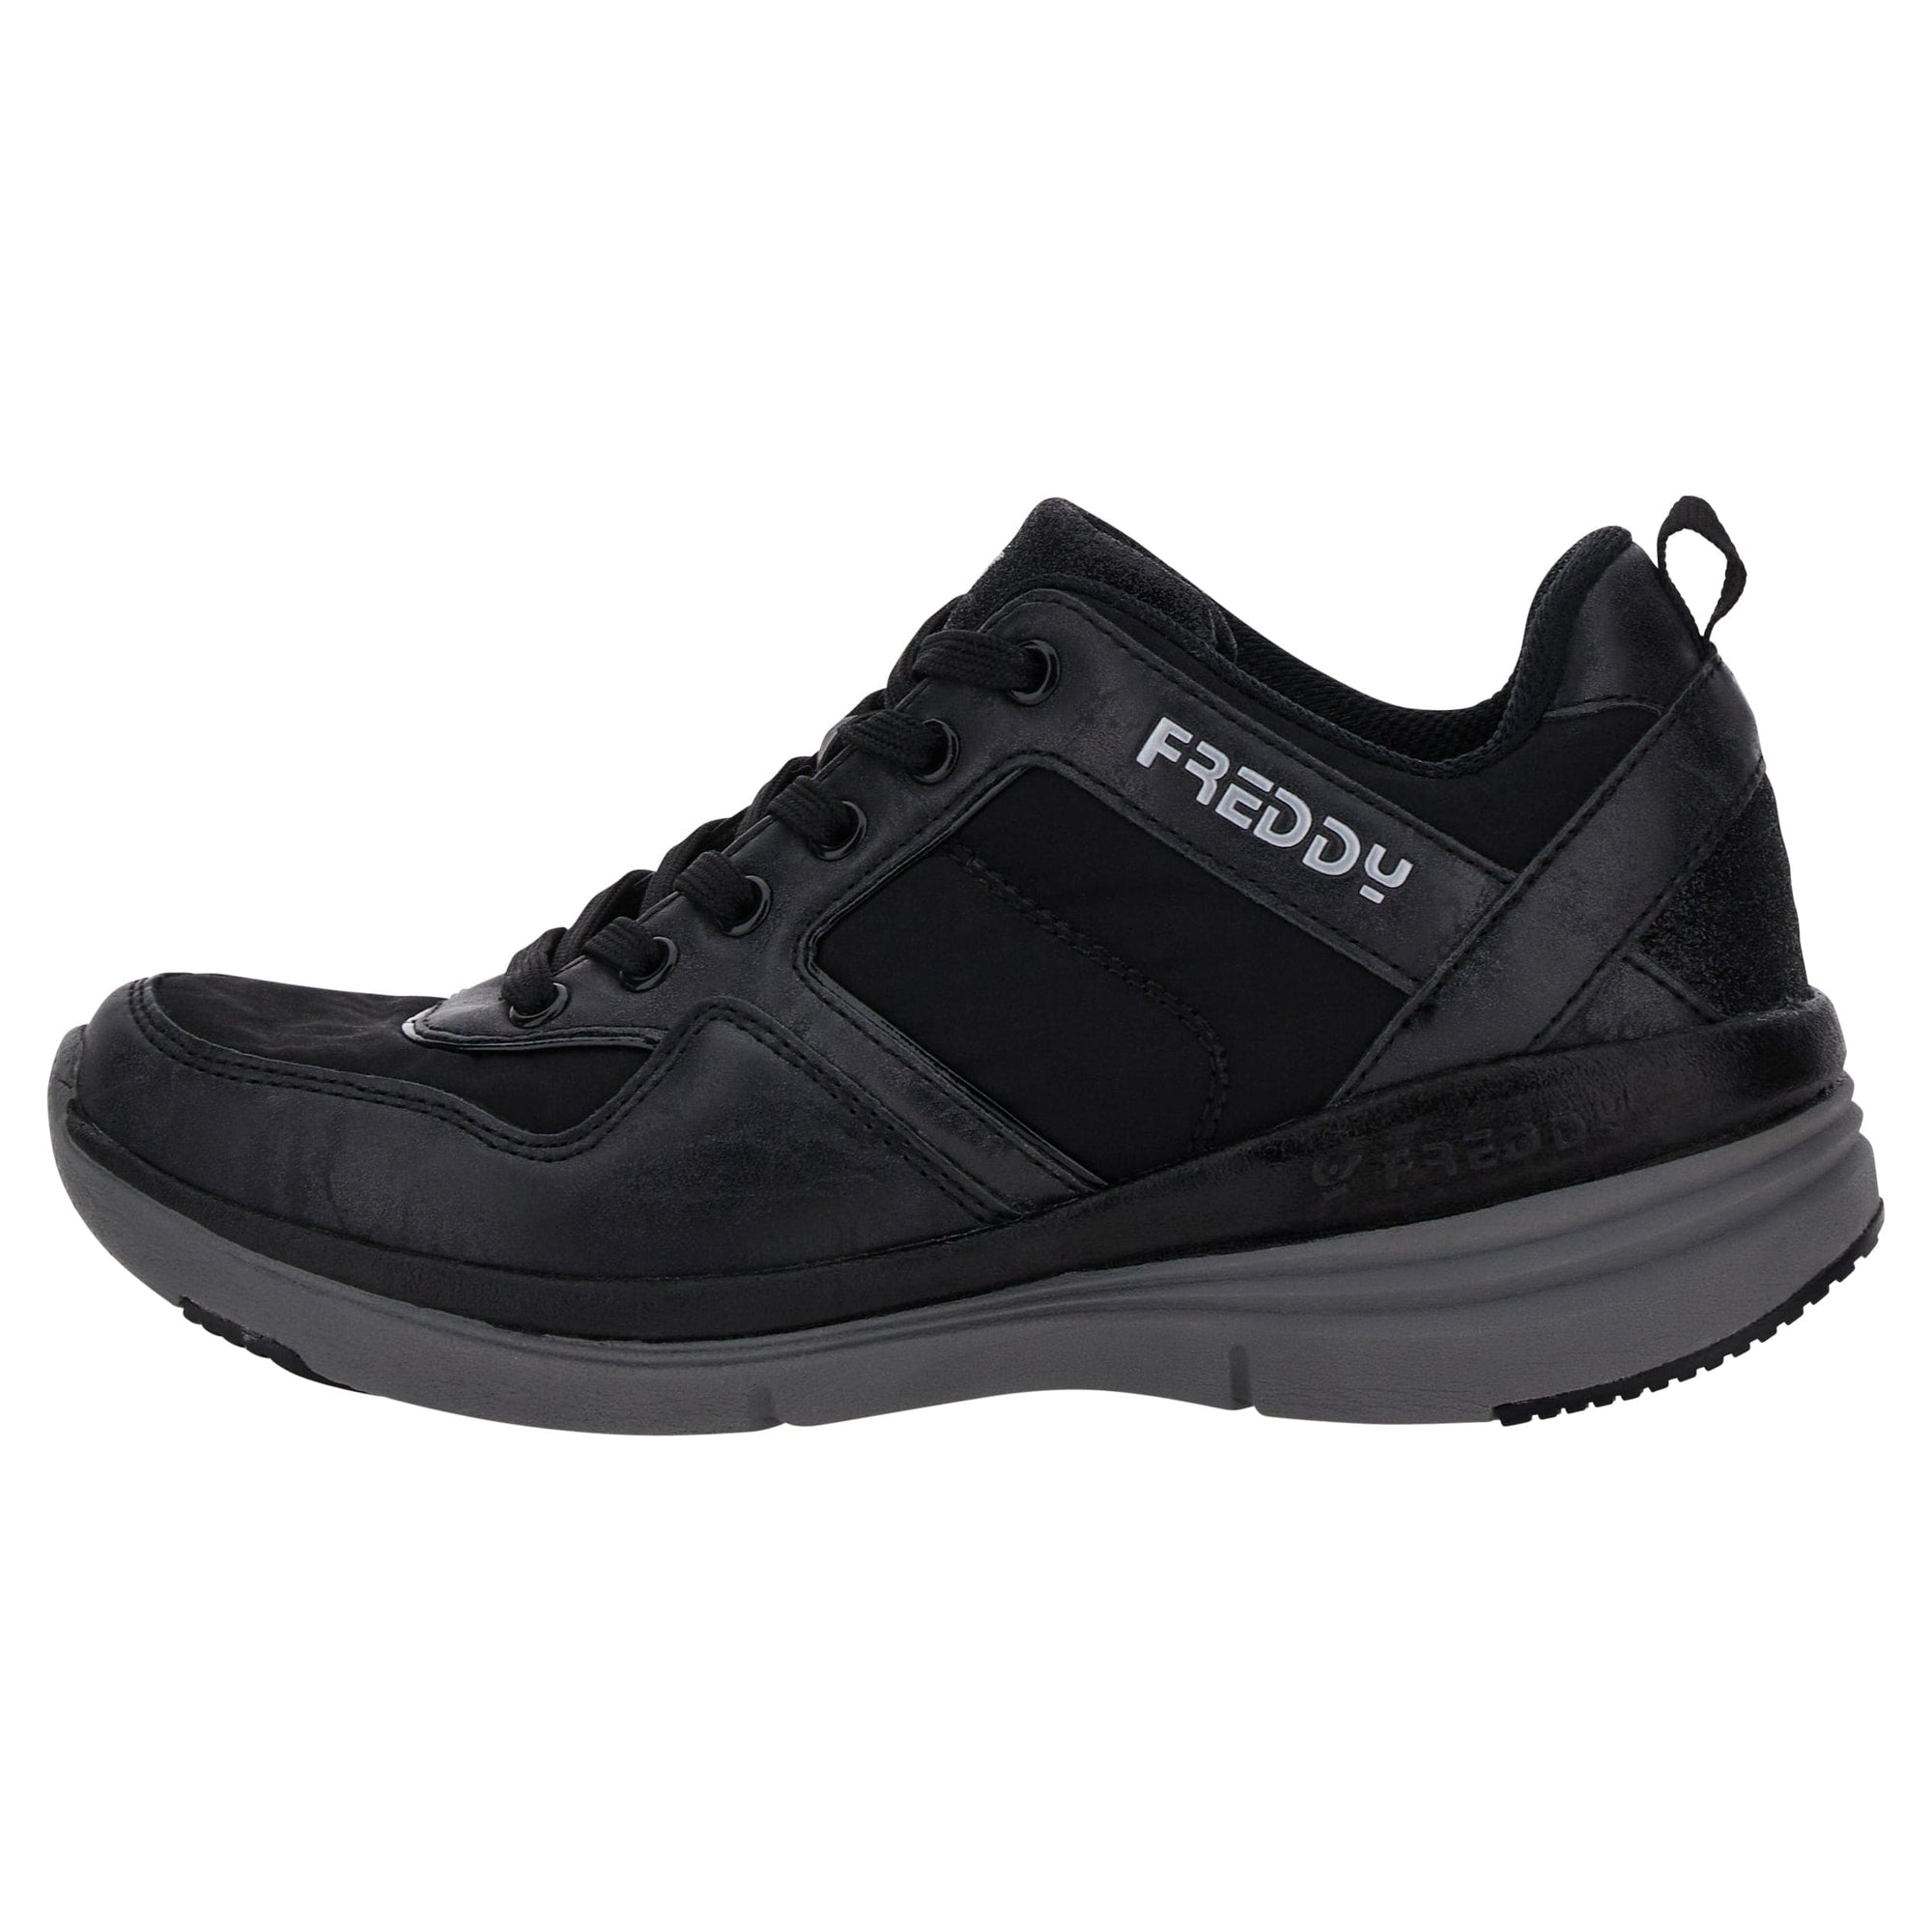 Fitness Shoes - Black 1